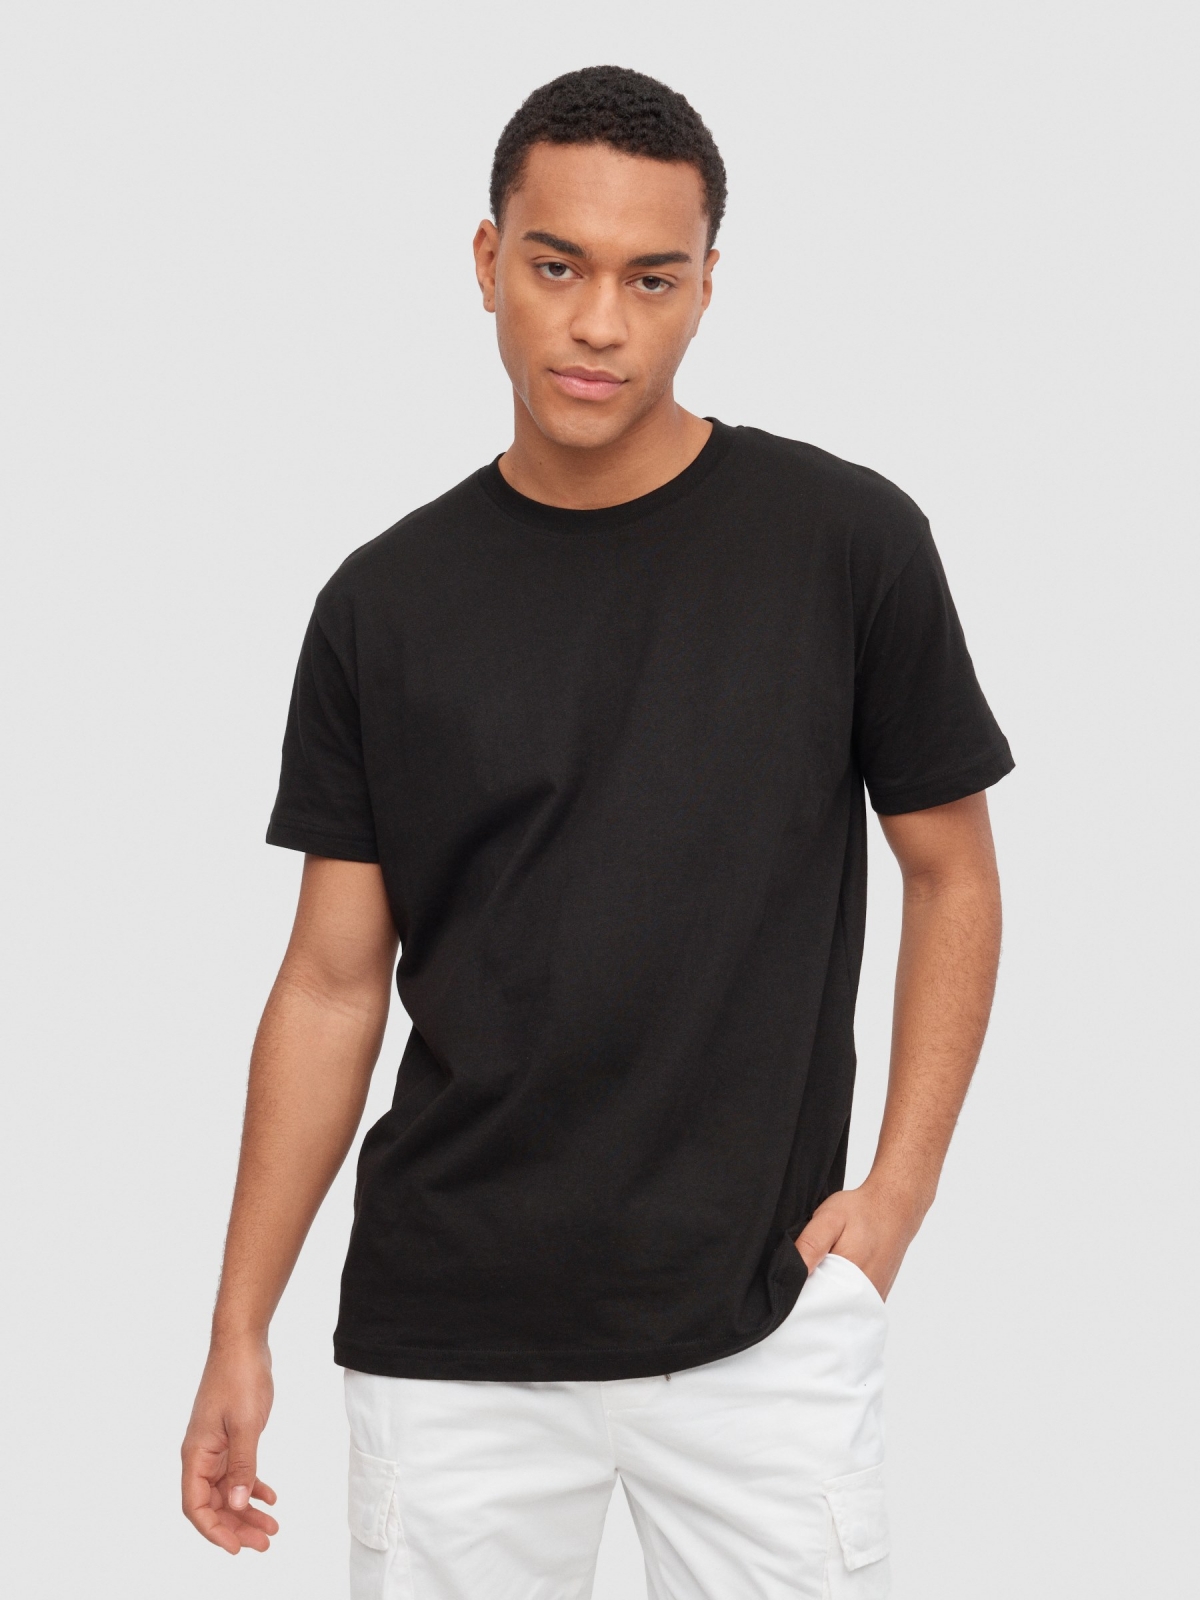 Basic T-shirt black middle front view